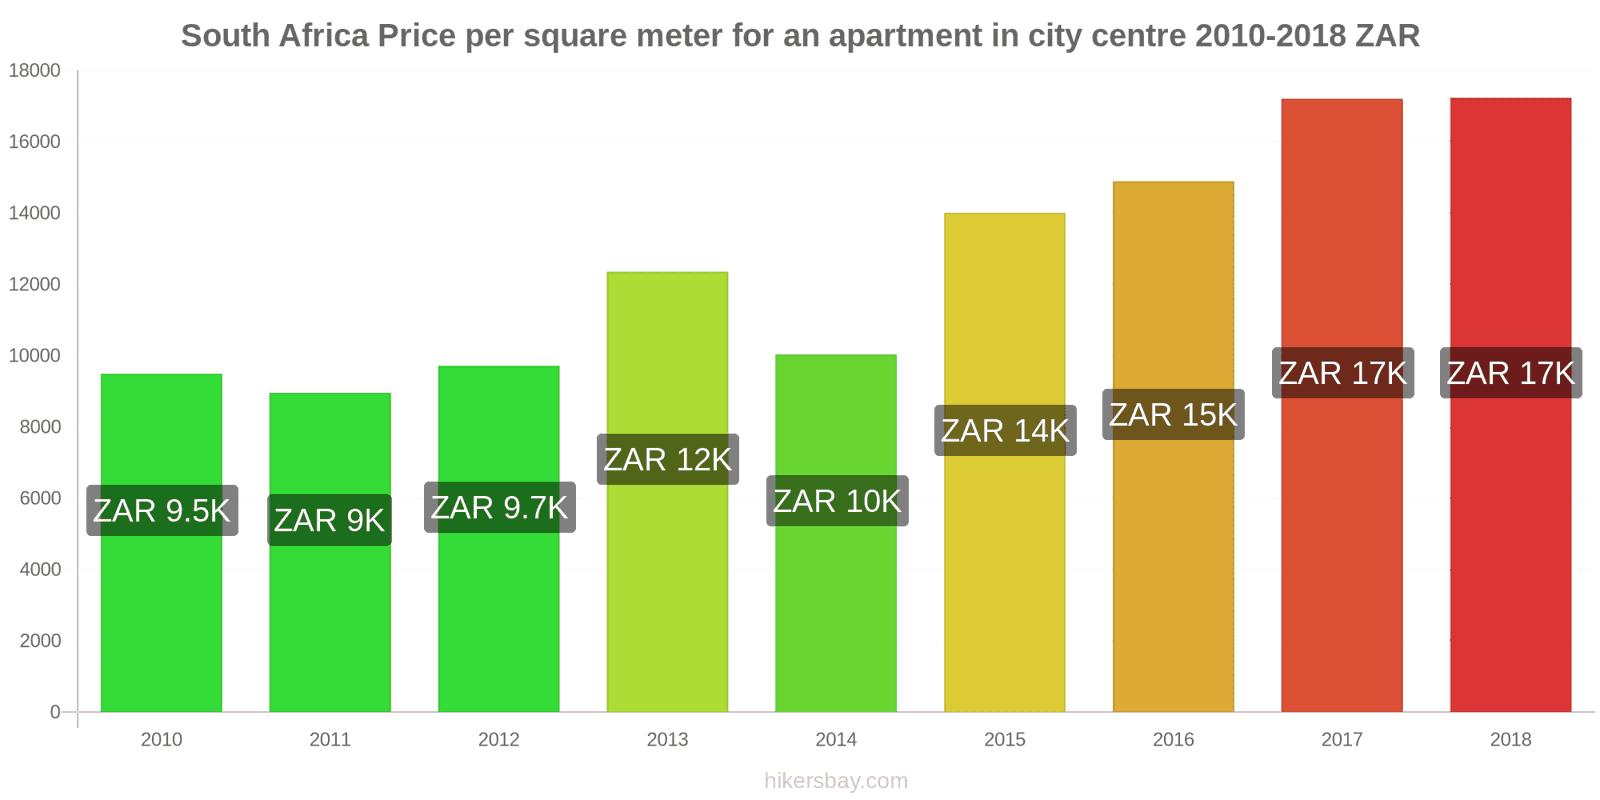 South Africa price changes Price per square meter for an apartment in the city center hikersbay.com